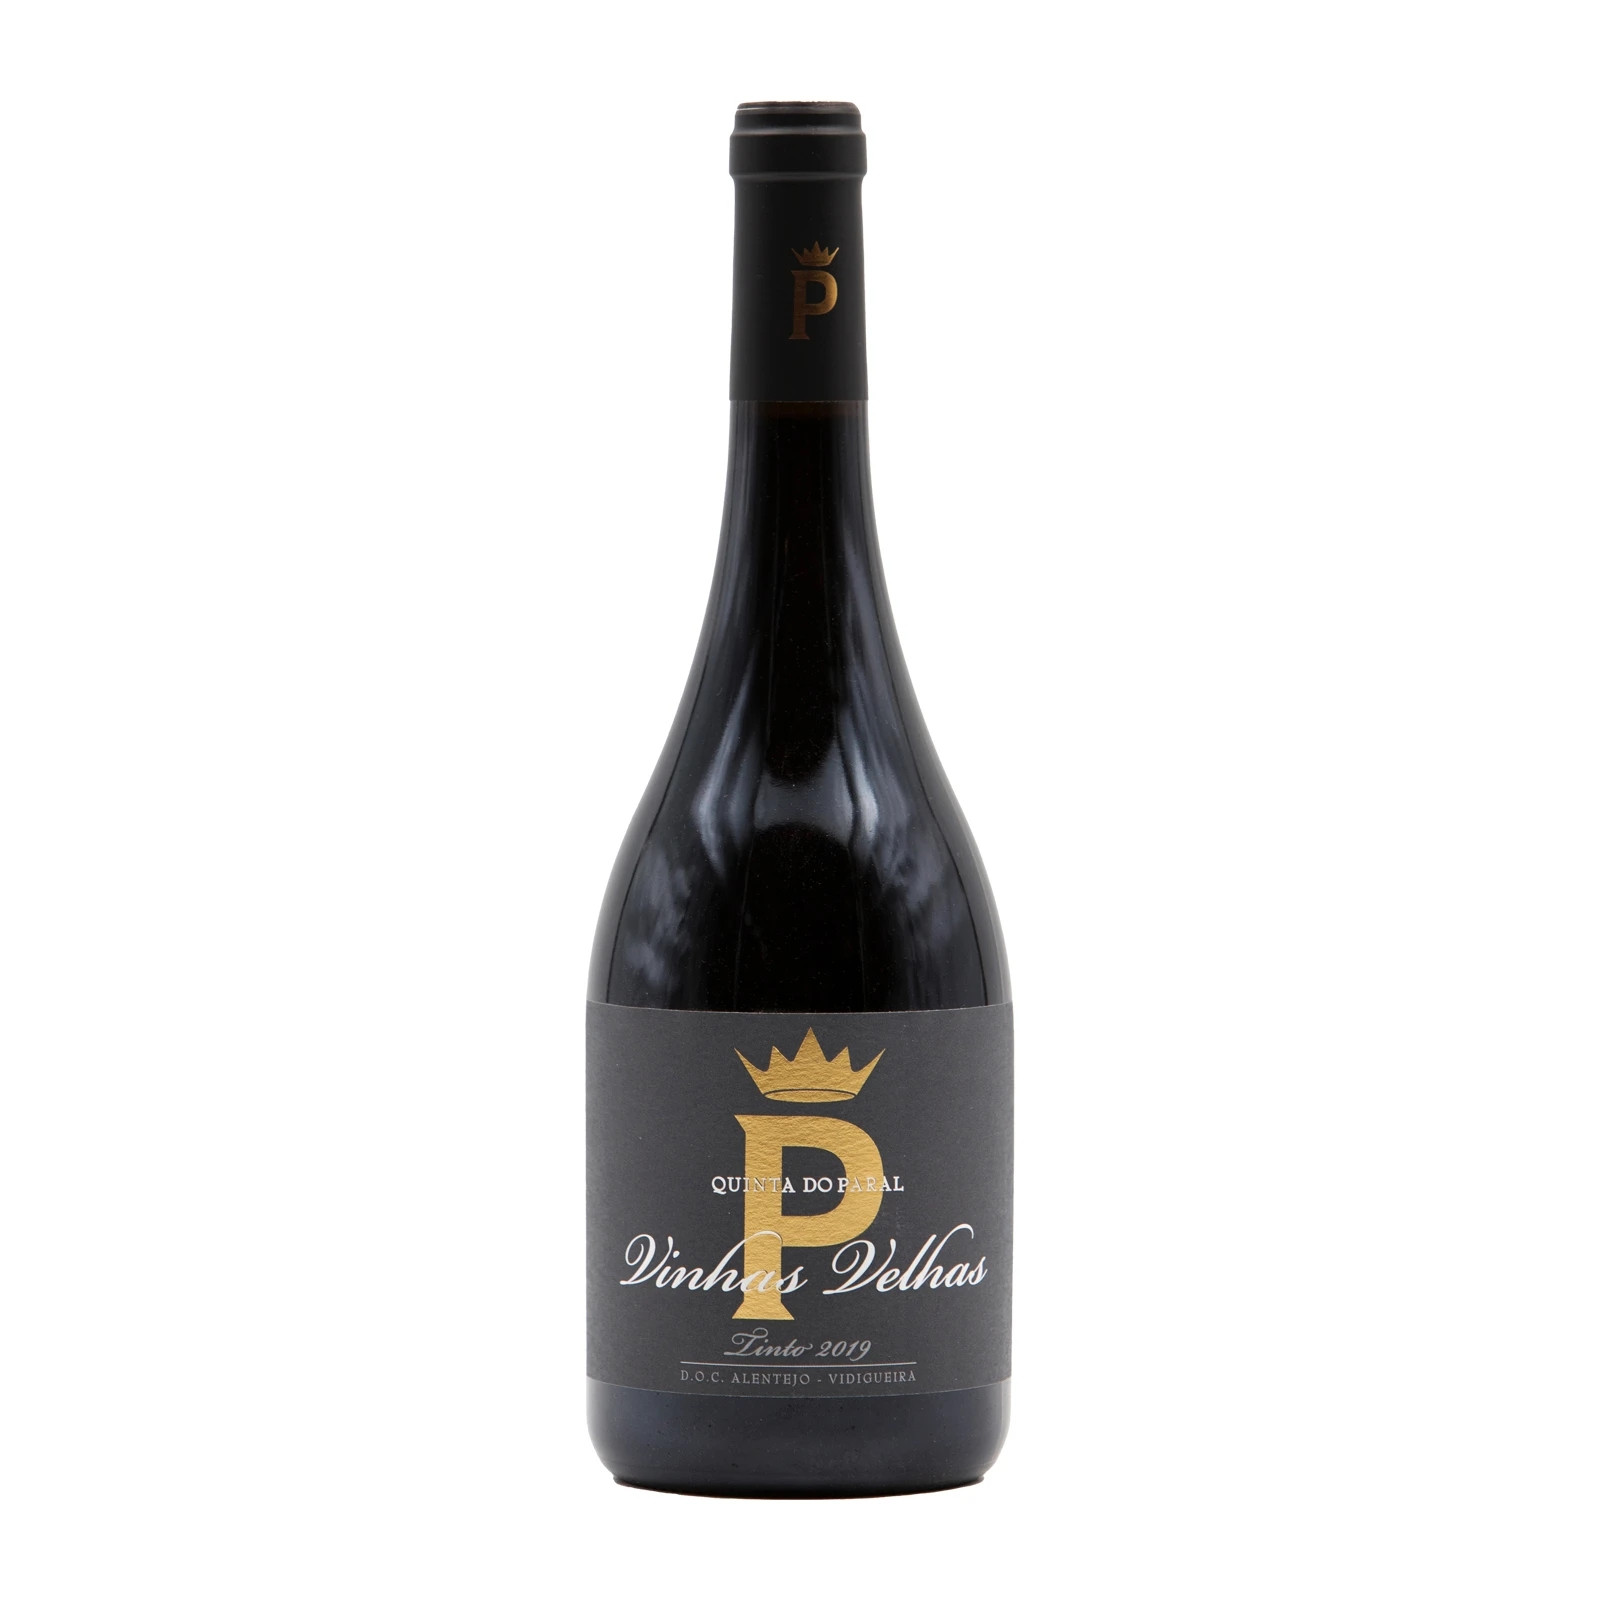 Quinta do Paral Old Vines Red 2019